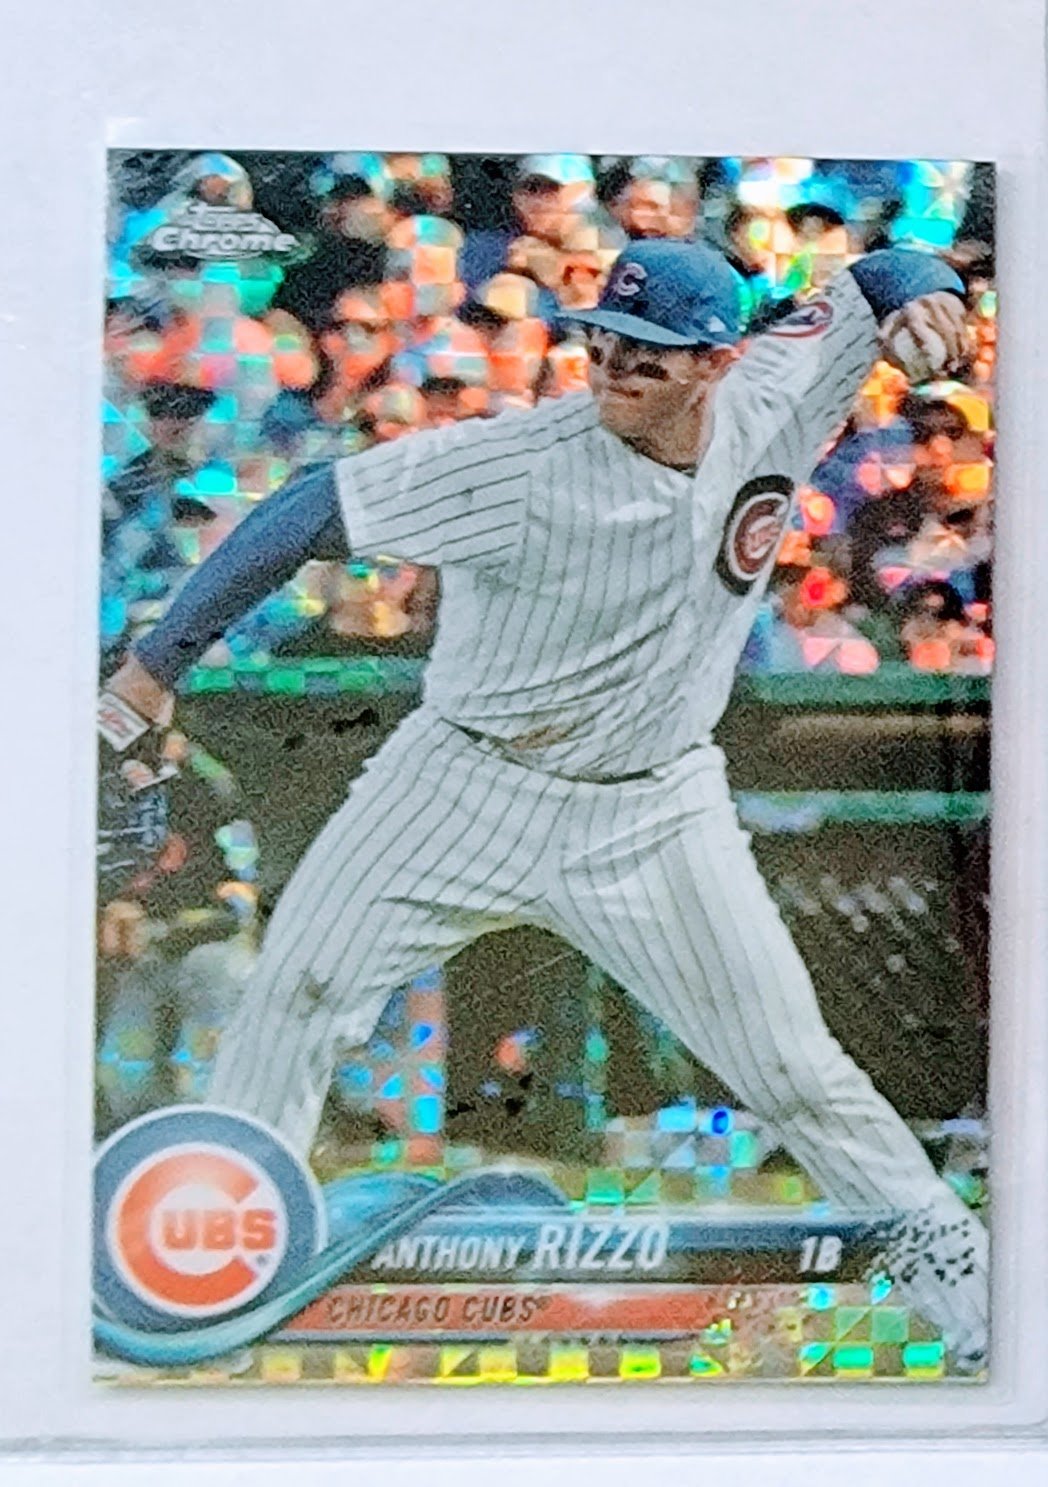 2018 Topps Chrome Anthony Rizzo Xfractor Refractor Baseball Trading Card TPTV simple Xclusive Collectibles   